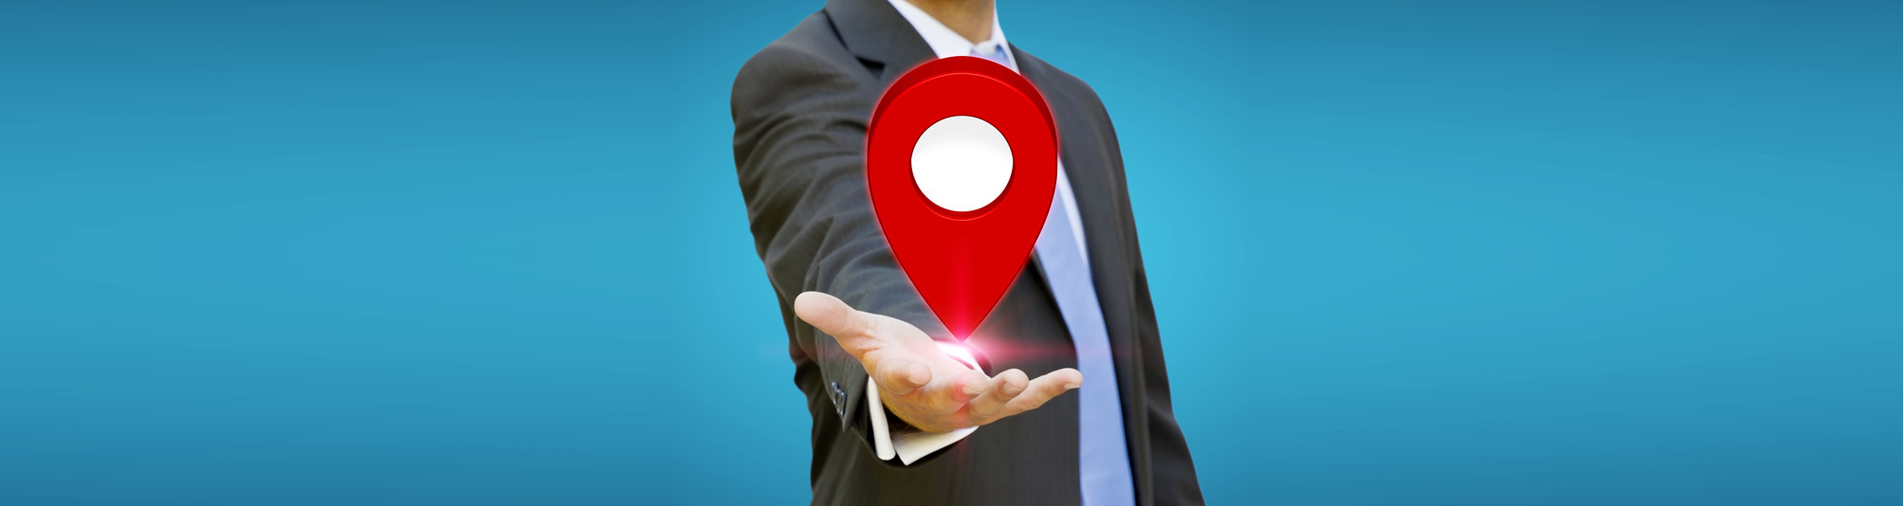 12 Ways to Optimize Your Medical Practice Location Page [Infographic]